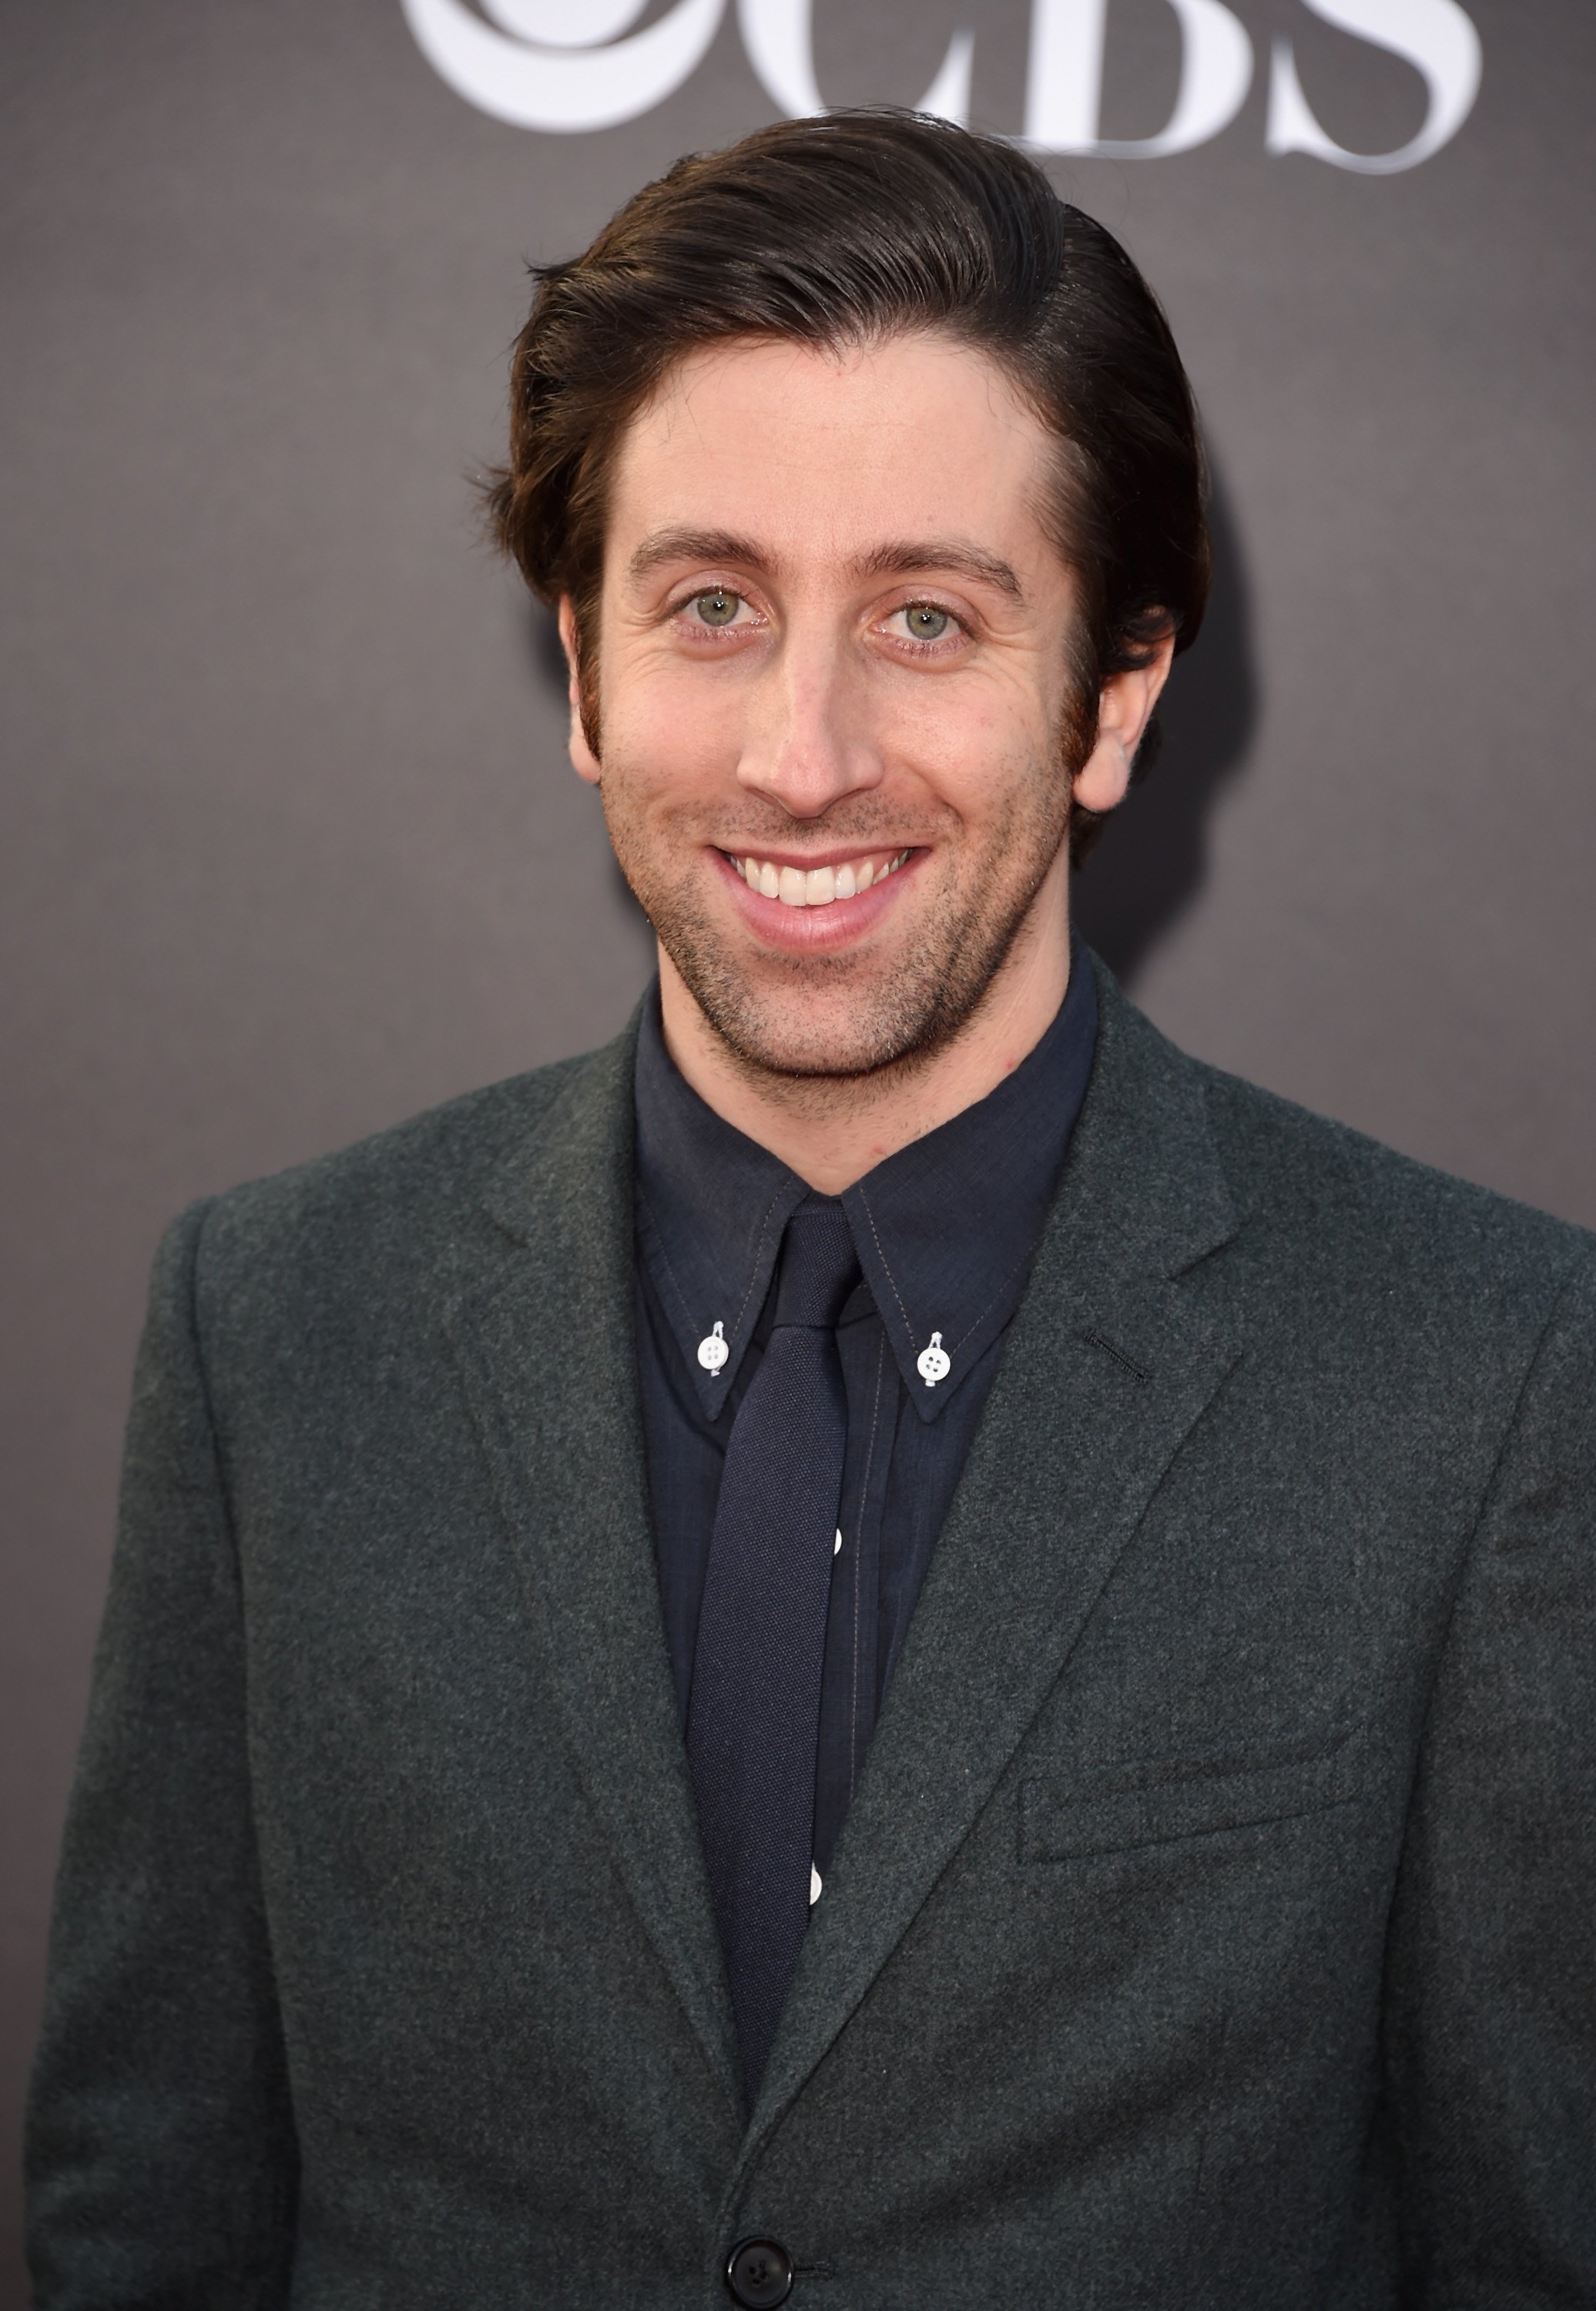 Simon Helberg attends the Hollywood Film Awards on November 14, 2014 in California. | Photo: Getty Images